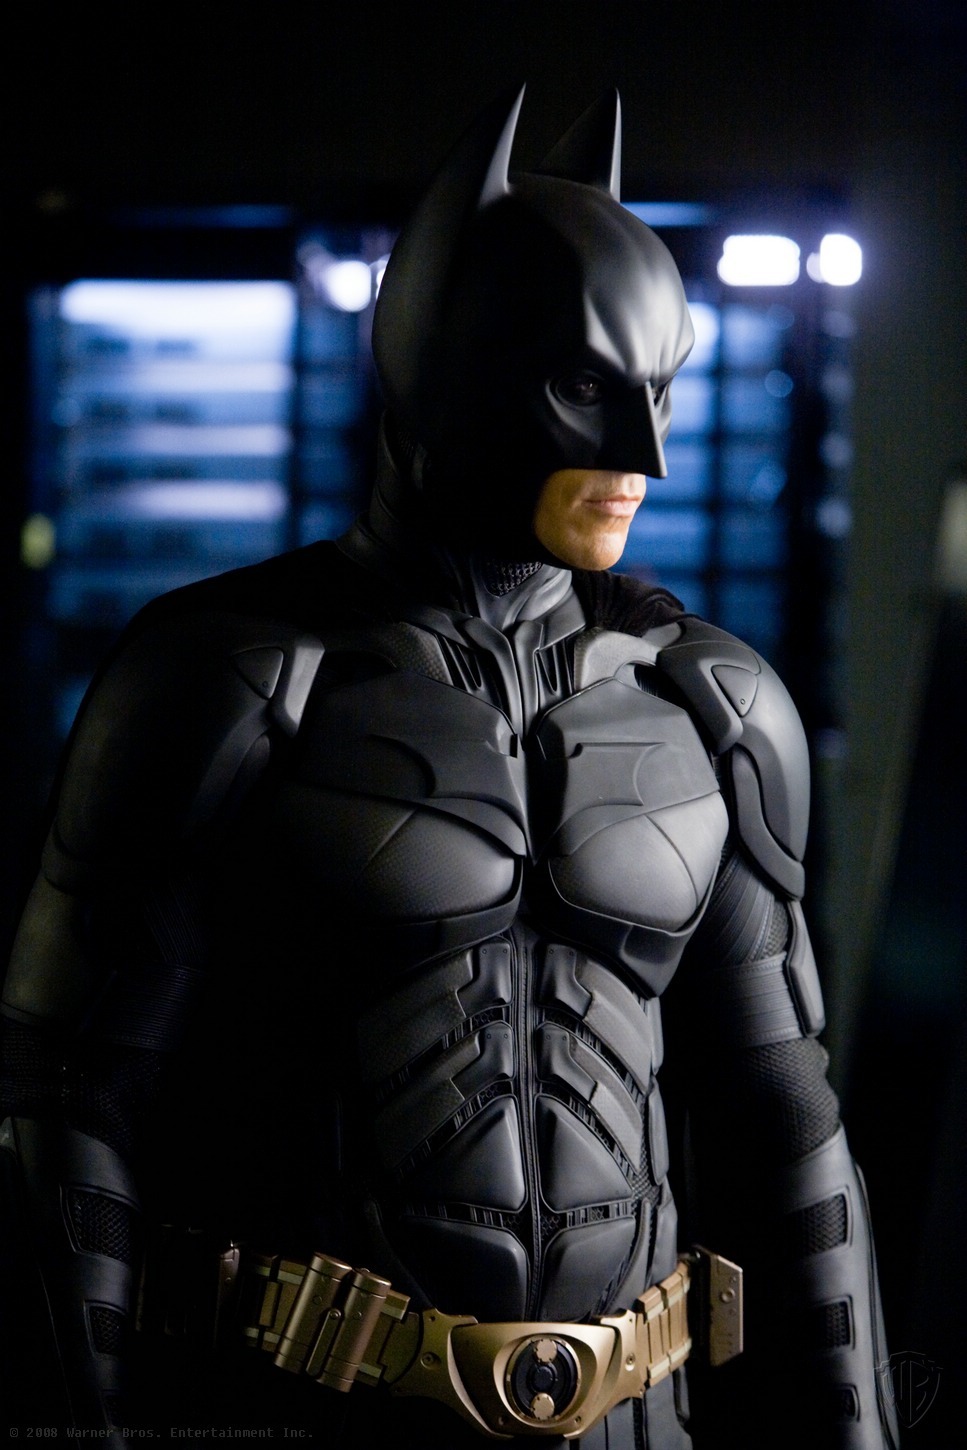 https://static.wikia.nocookie.net/batman/images/8/8f/Christian_Bale_as_The_Dark_Knight.jpg/revision/latest?cb=20210312234853